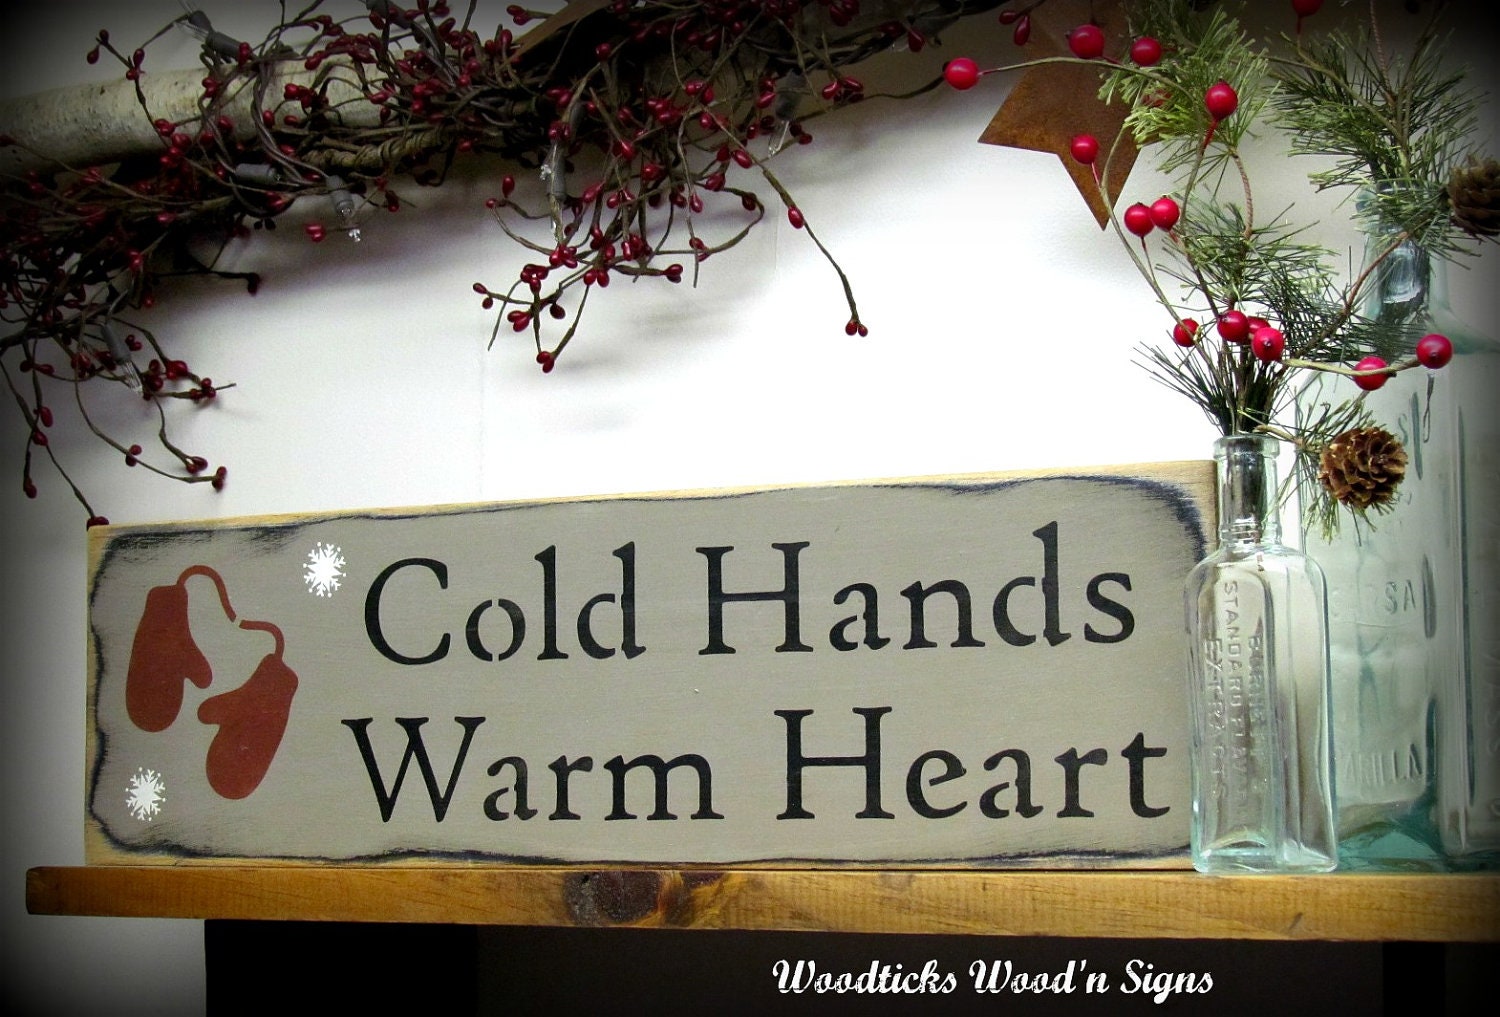 cold heart meaning